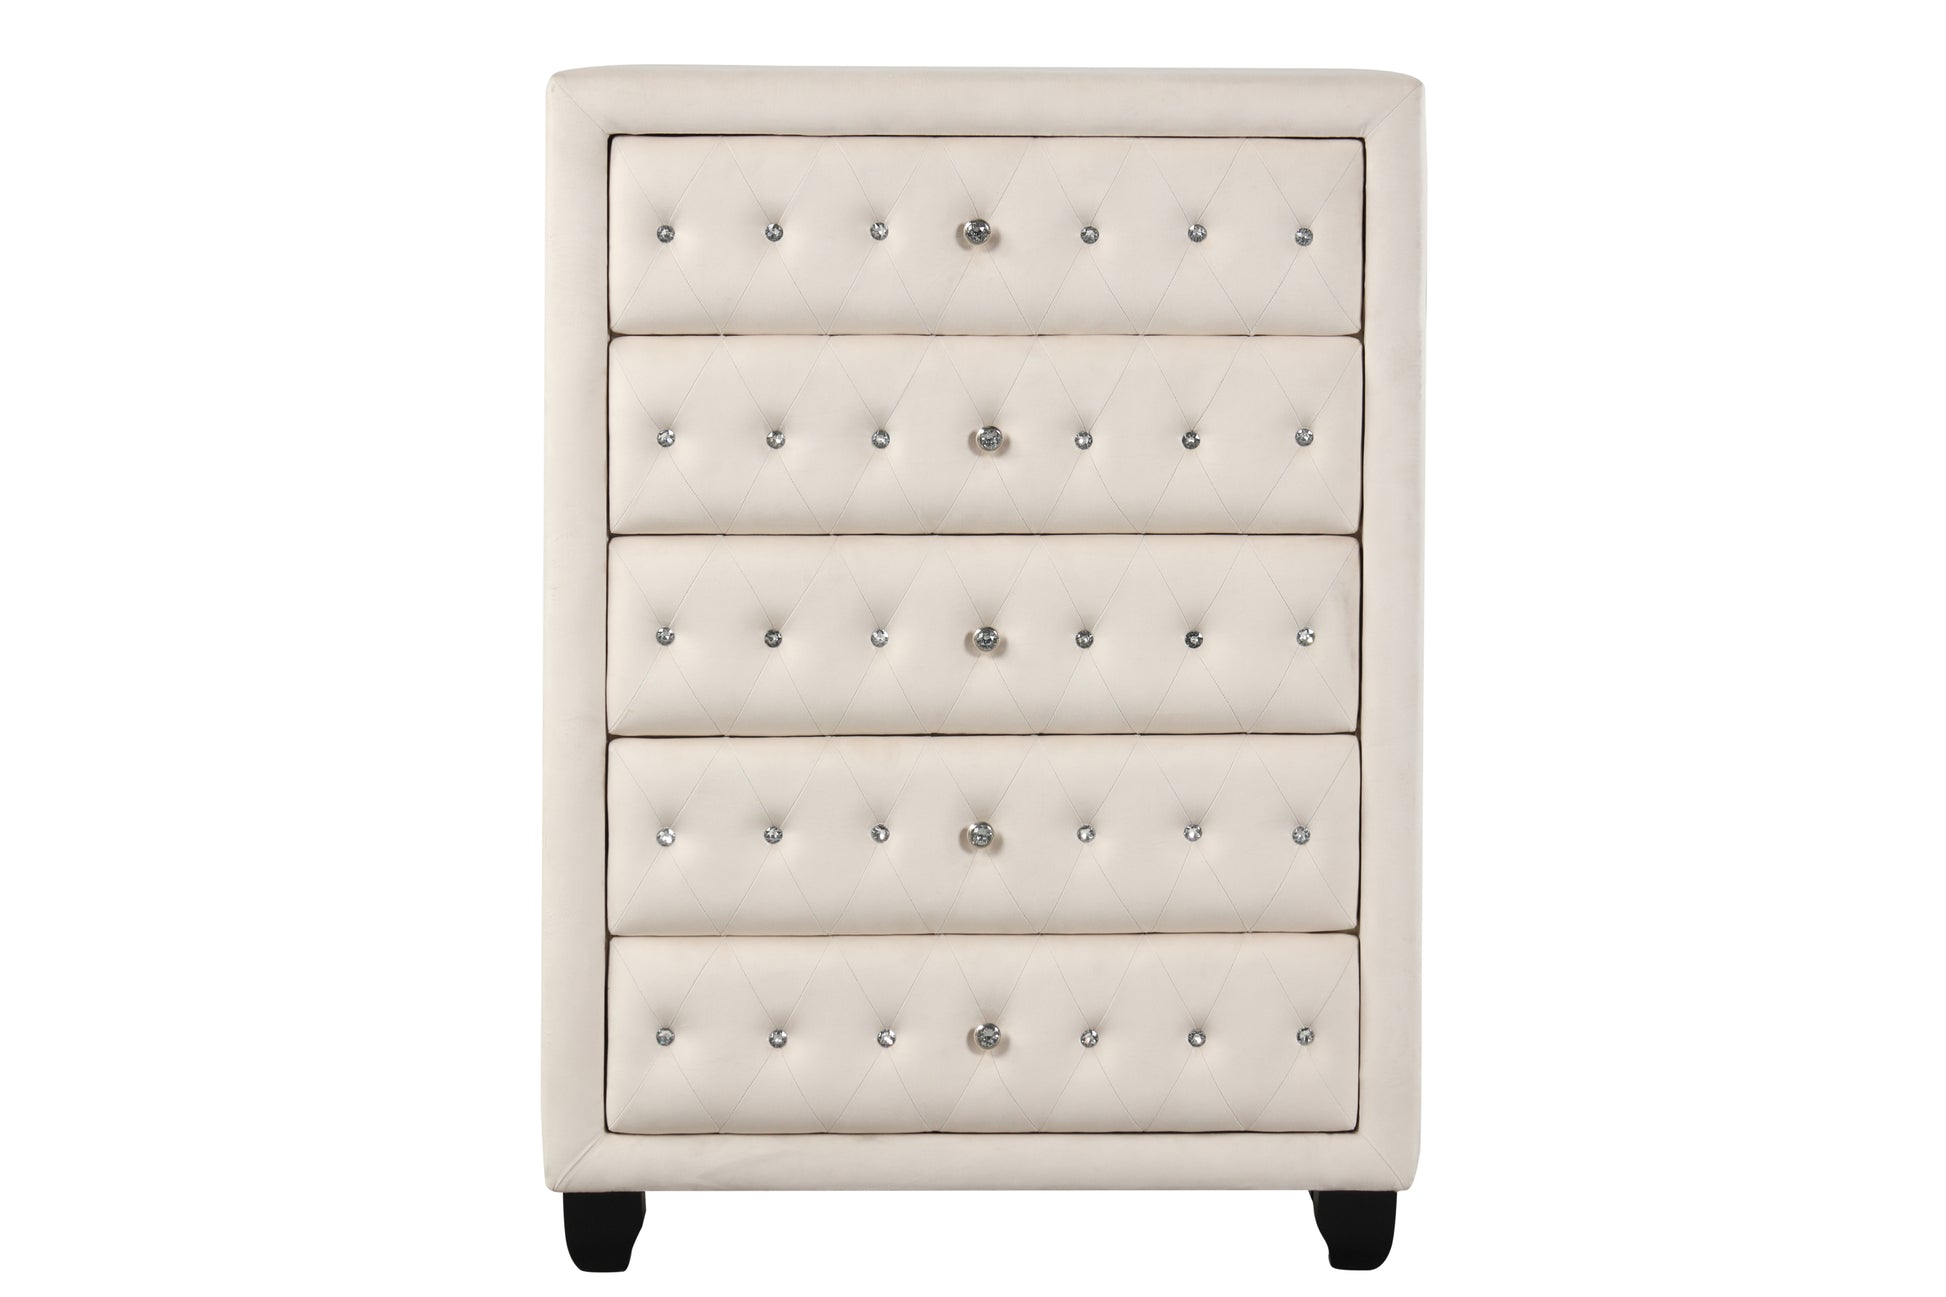 Sophia Crystal Tufted Full 5 Pc Bed Made with Wood in Cream - Enova Luxe Home Store